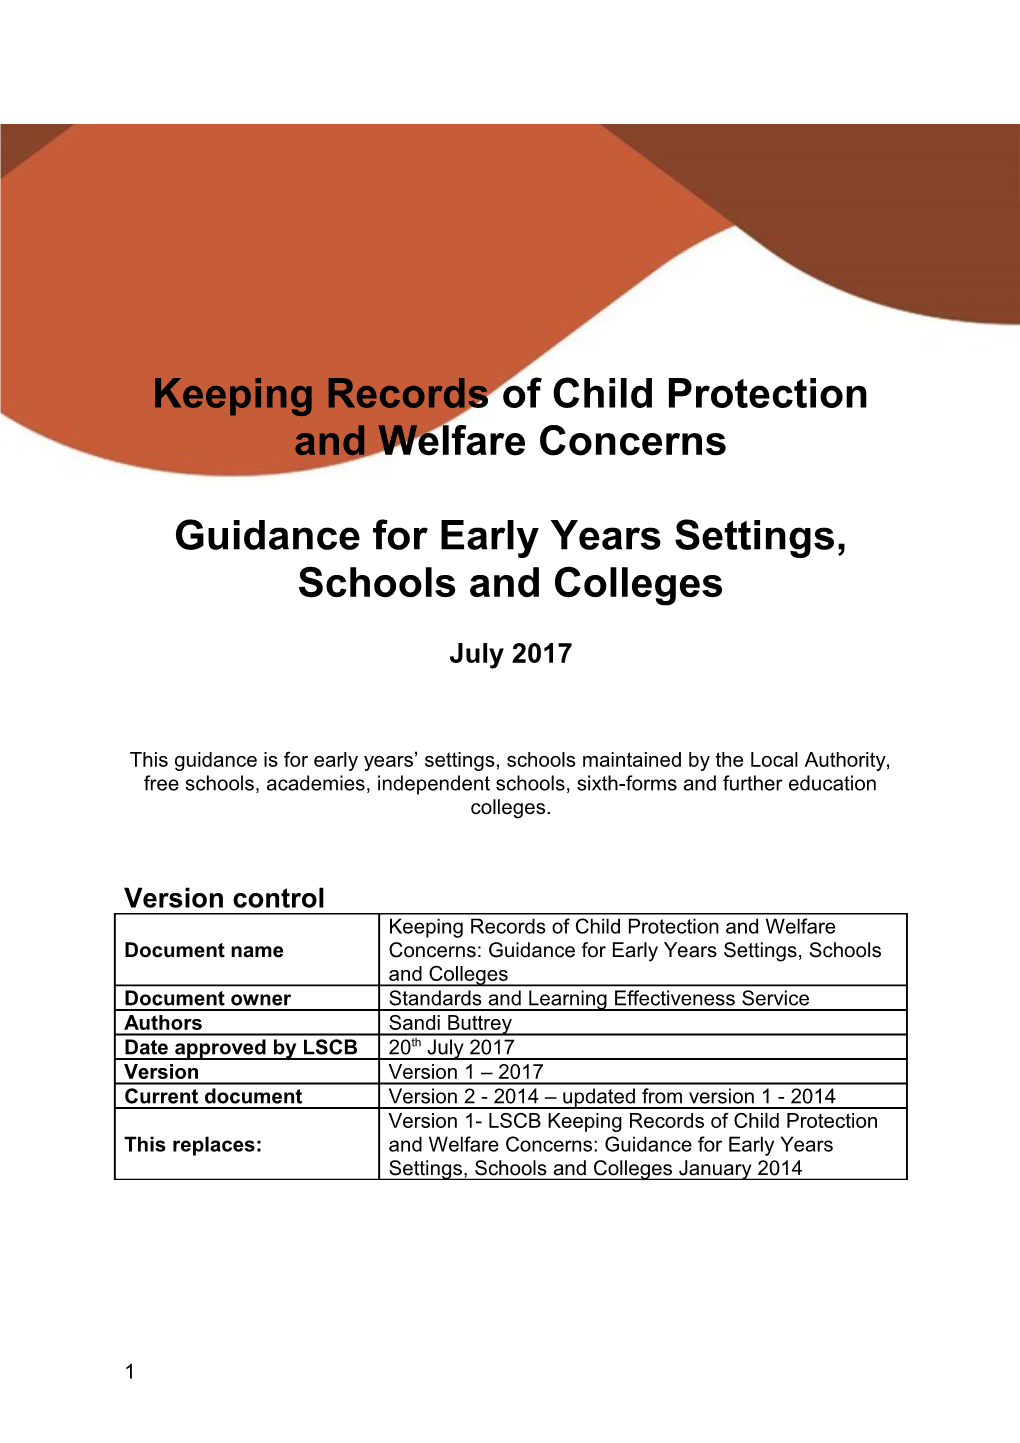 Keeping Records of Child Protection and Welfare Concerns